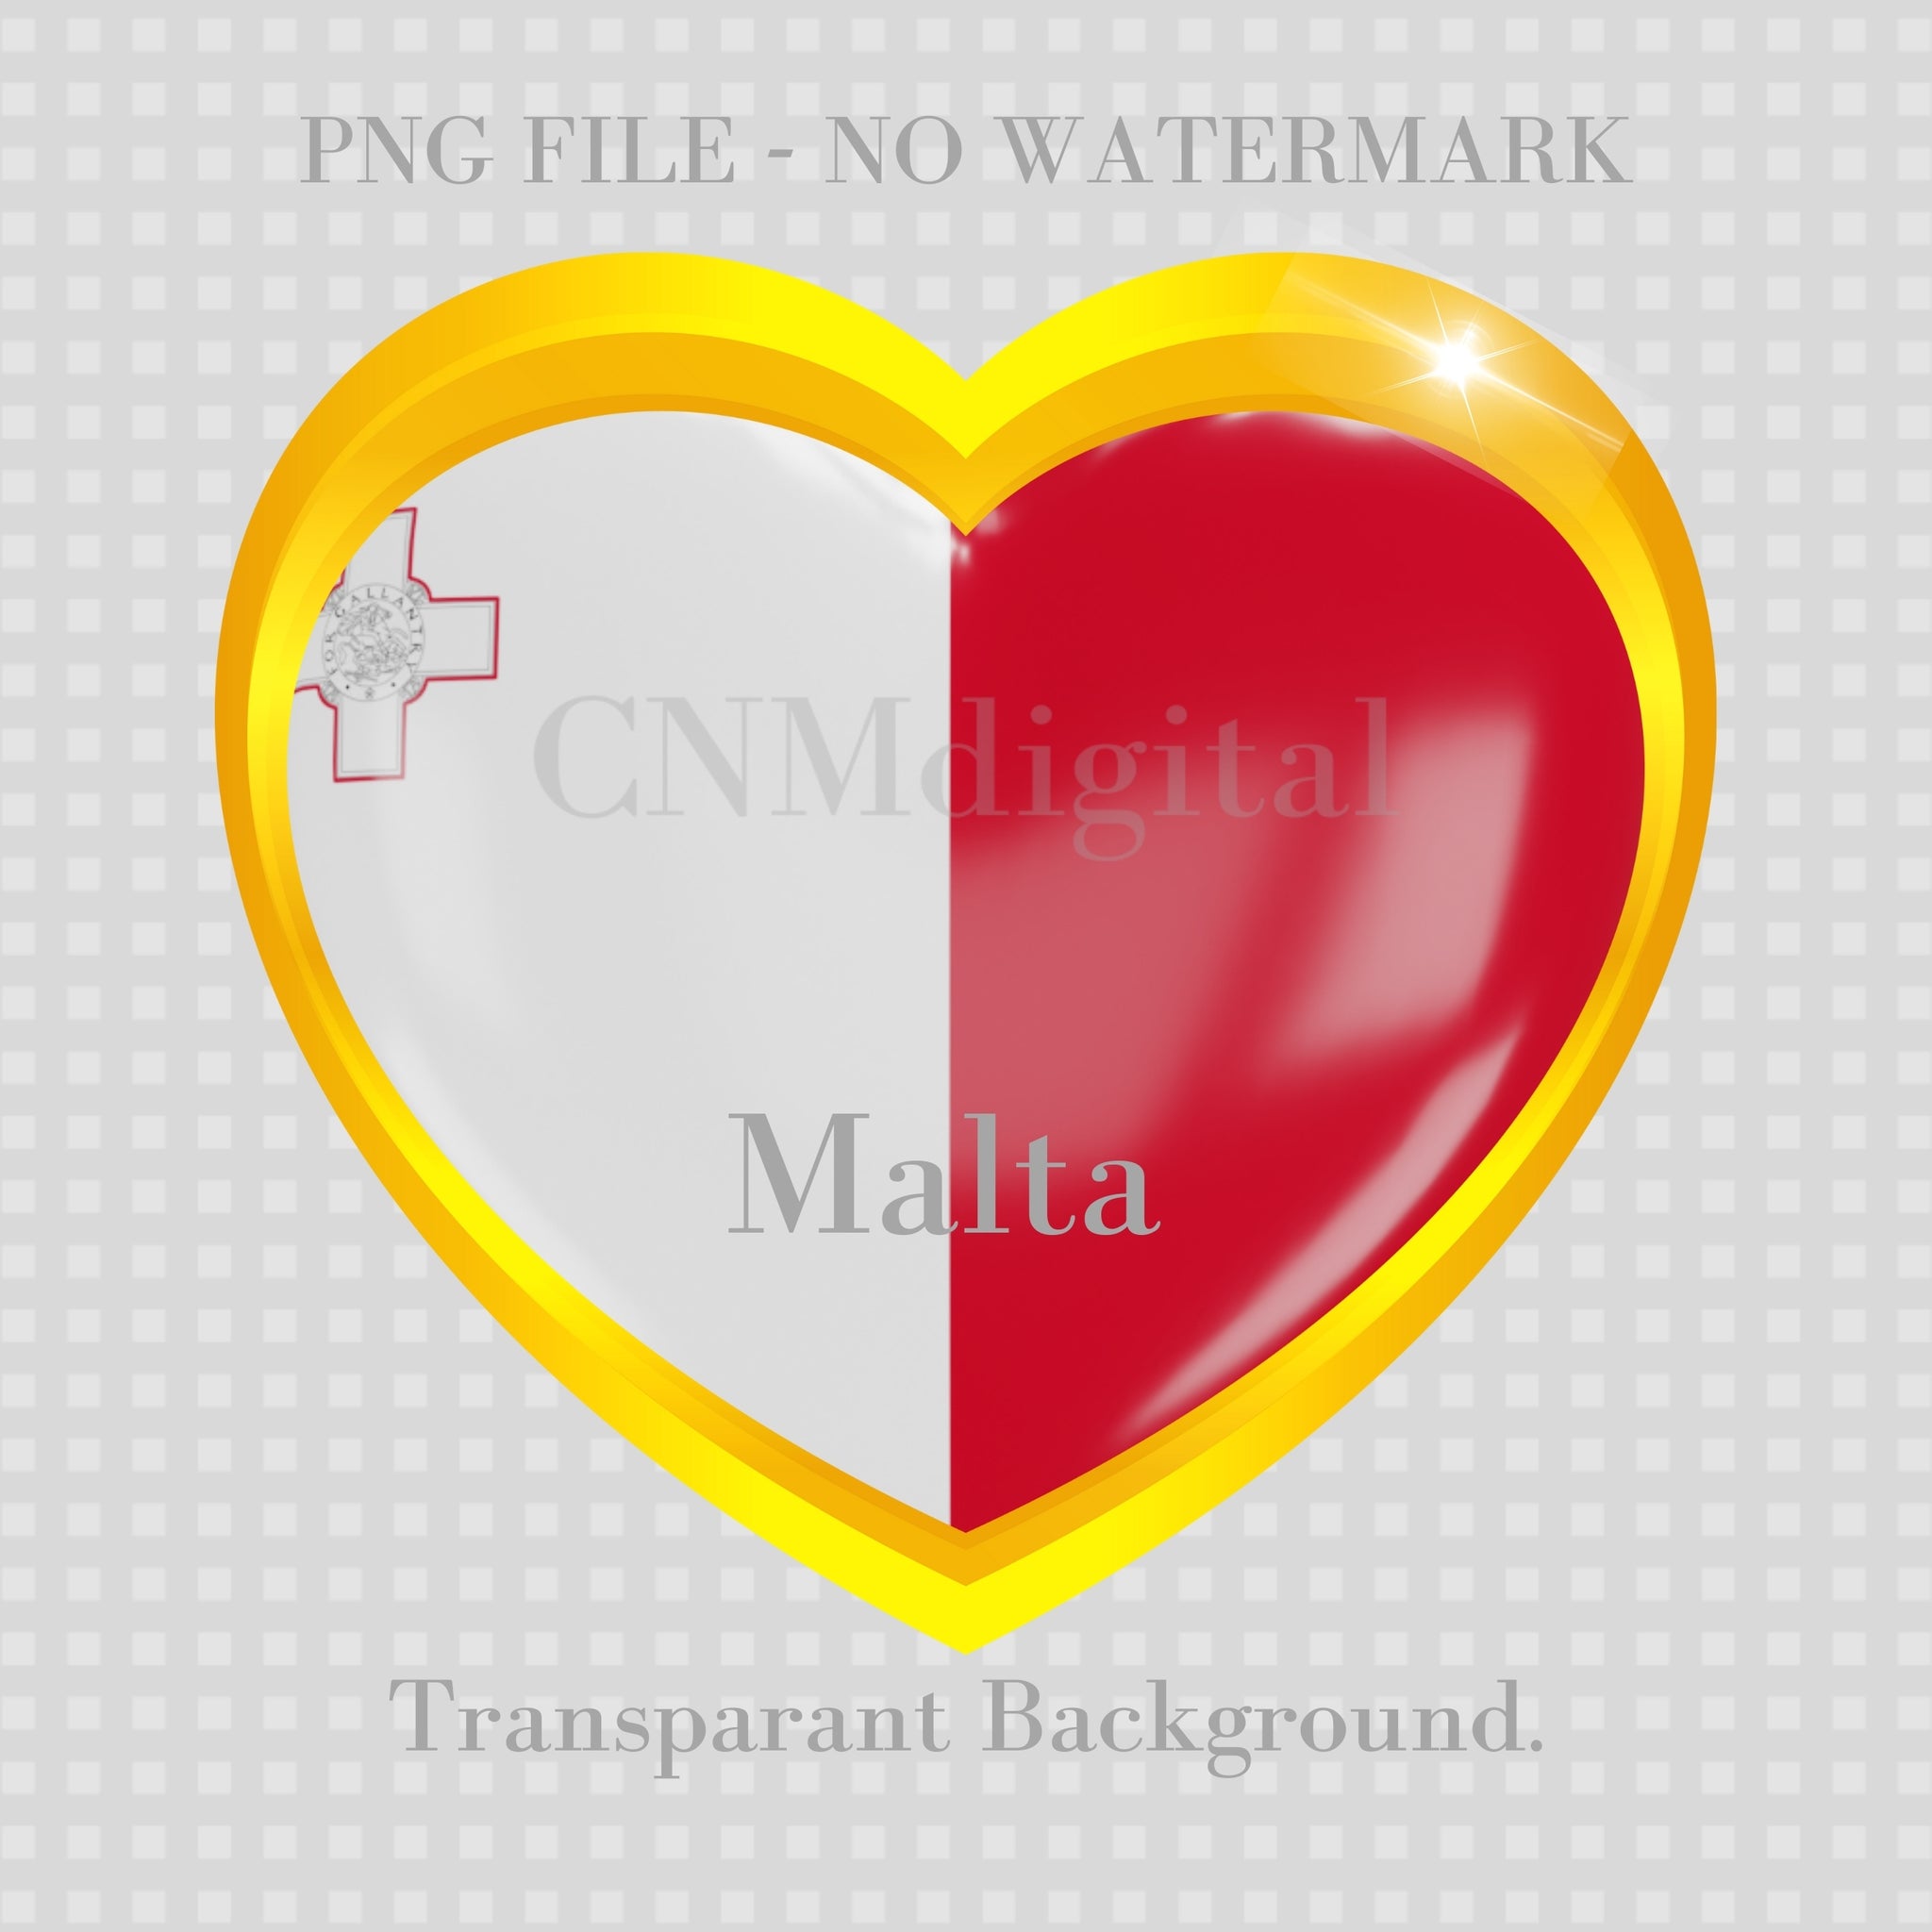 Malta flag country, Instant Download, digital file flags, Heart shaped, Malta Nation flag, Malta European country, World Clip Art, national flags, Flags collection High Quality Transparent PNG file ready to print.